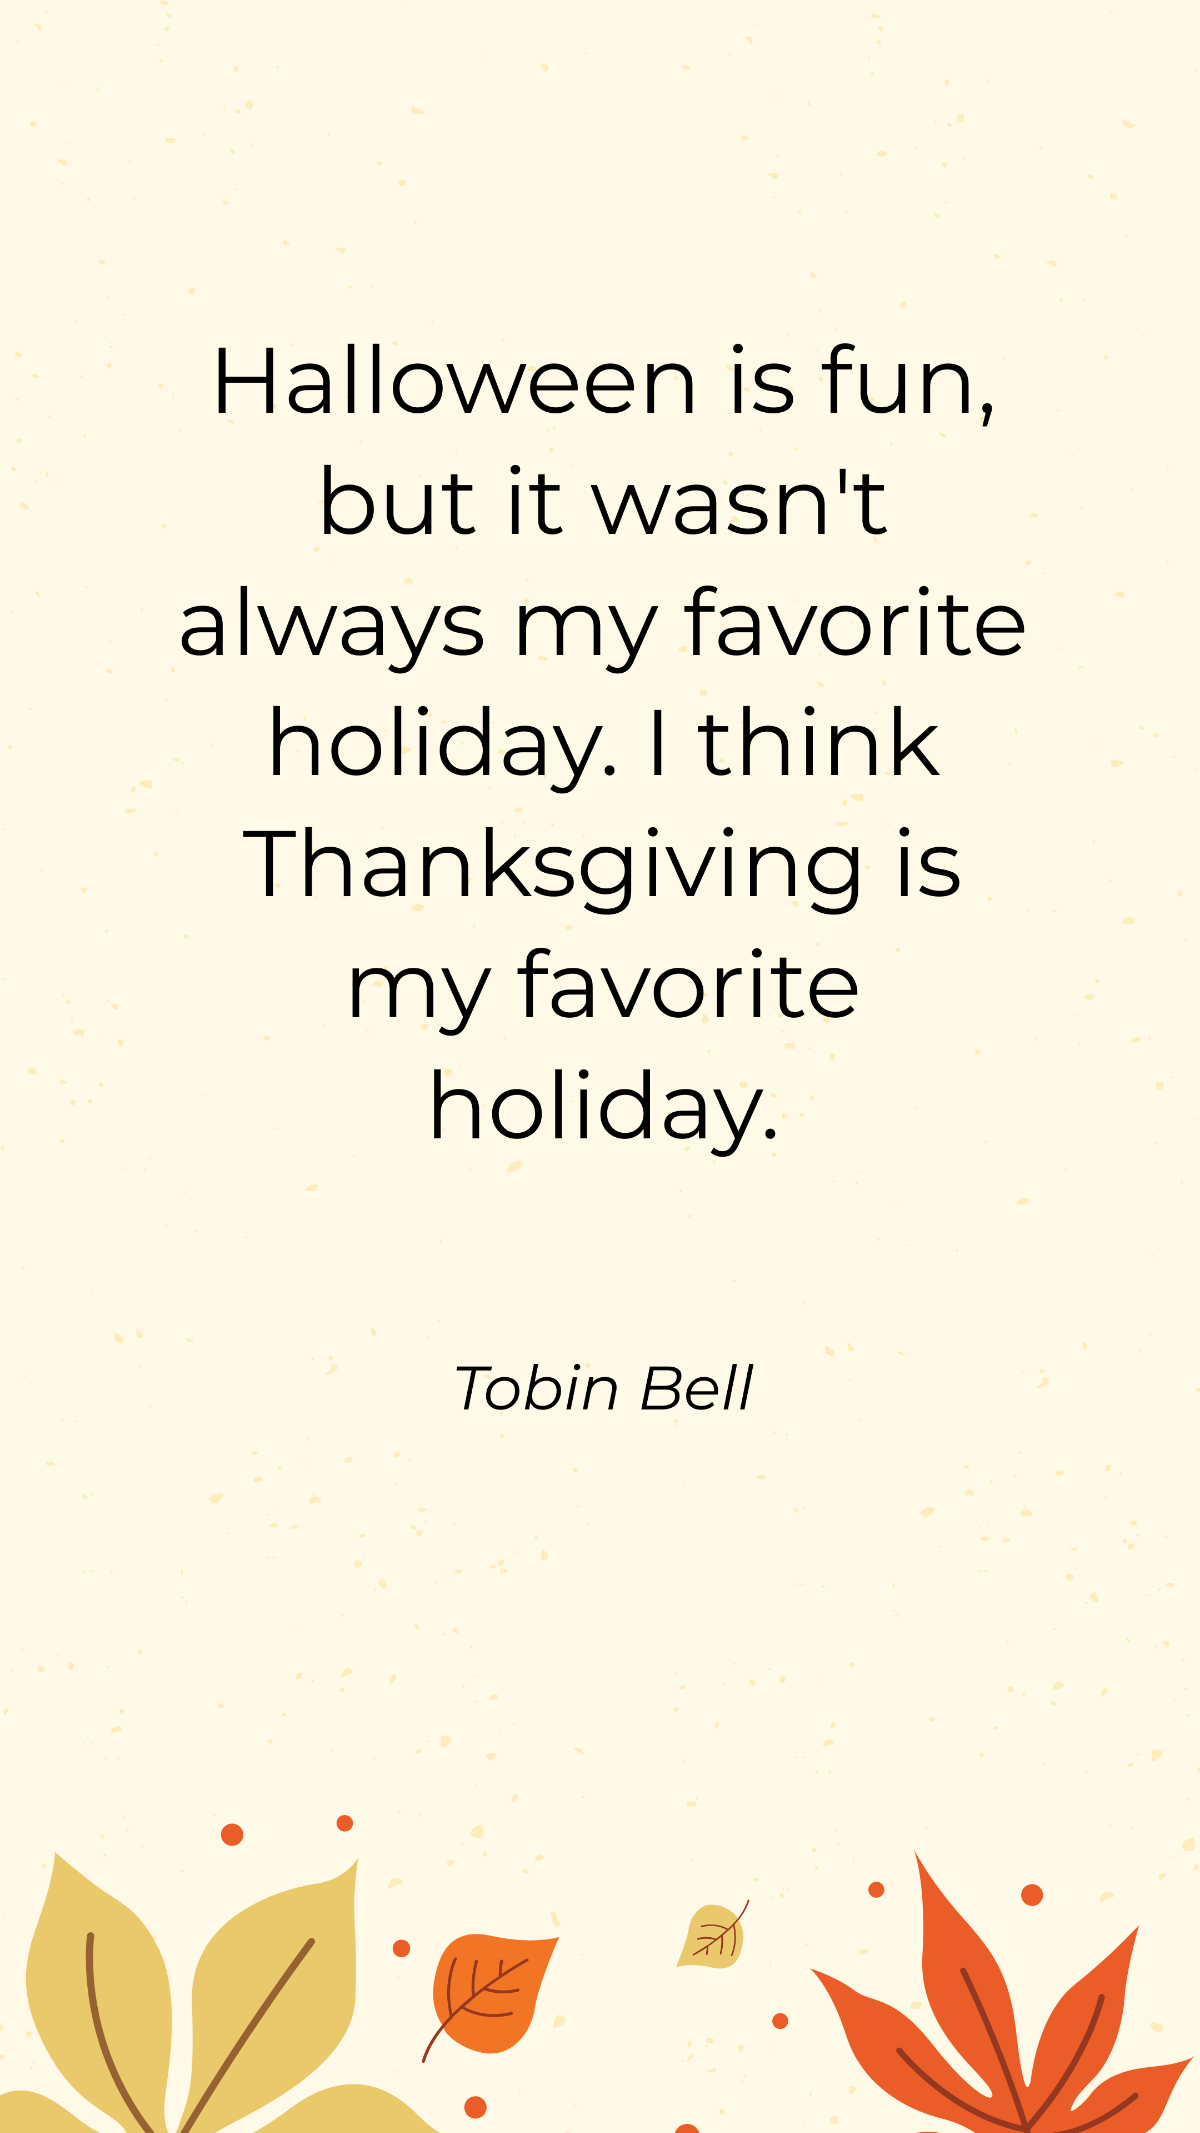 Tobin Bell - Halloween is fun, but it wasn't always my favorite holiday. I think Thanksgiving is my favorite holiday. Template